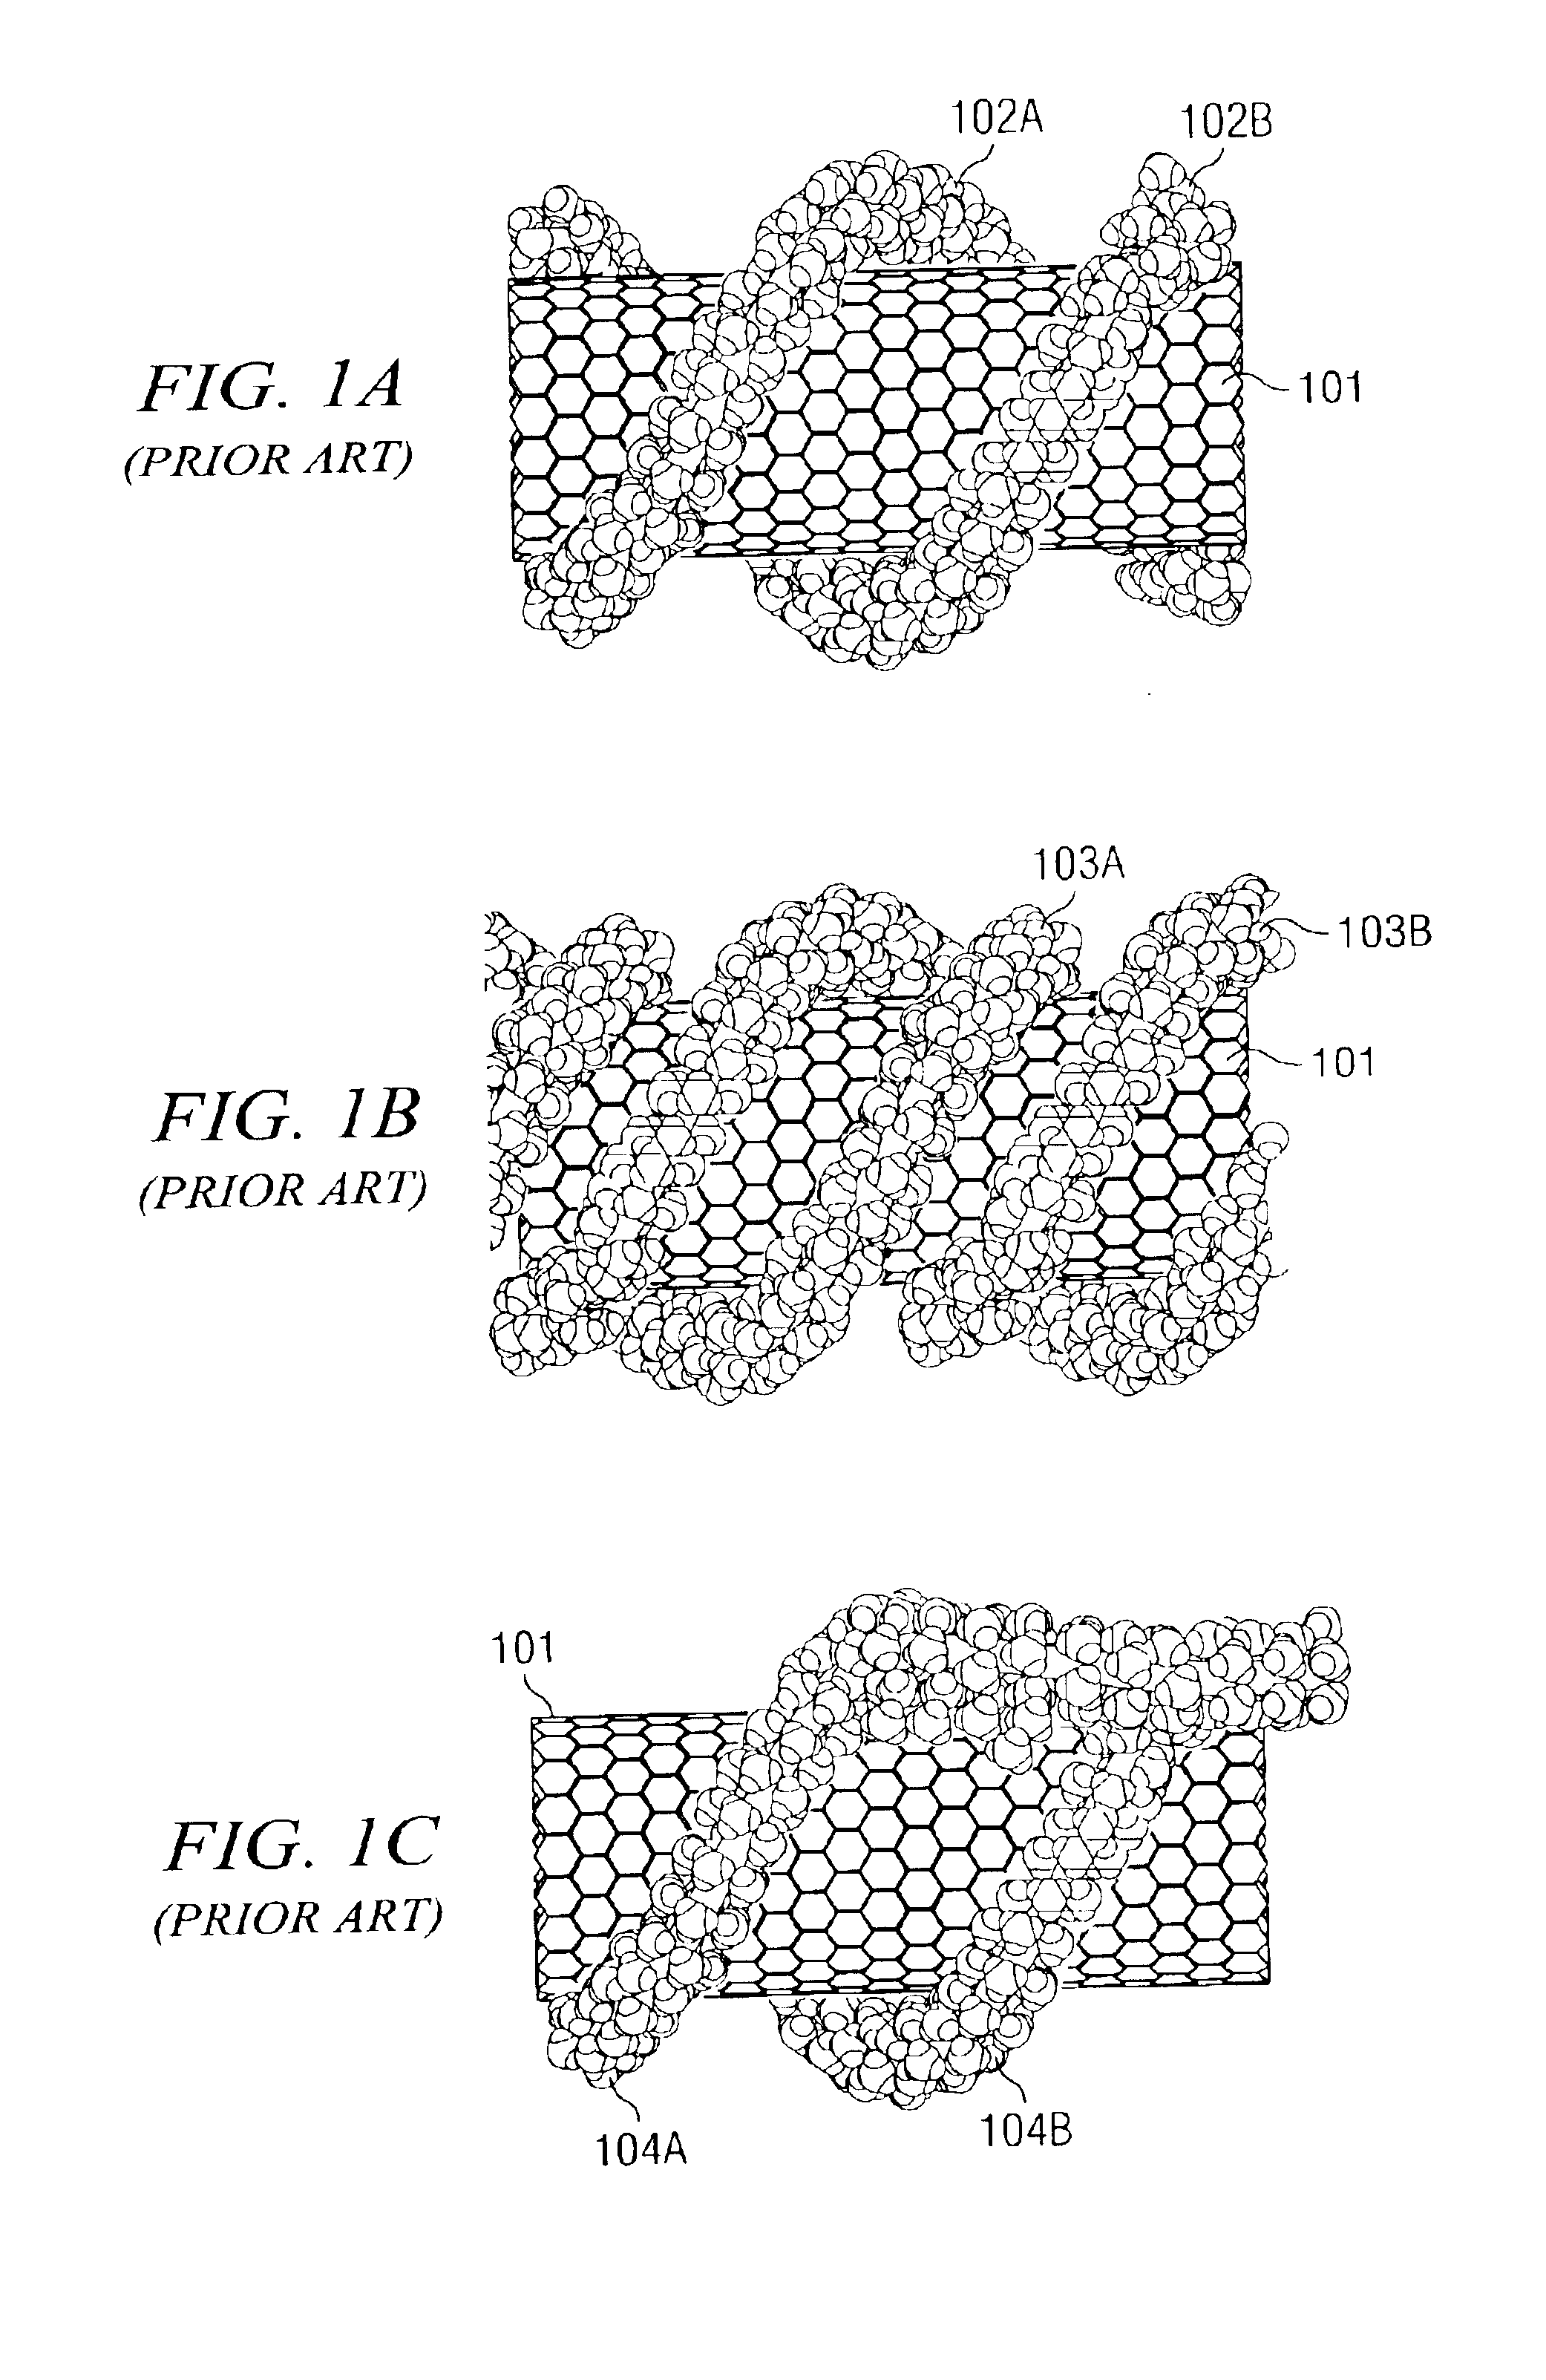 Polymer and method for using the polymer for noncovalently functionalizing nanotubes